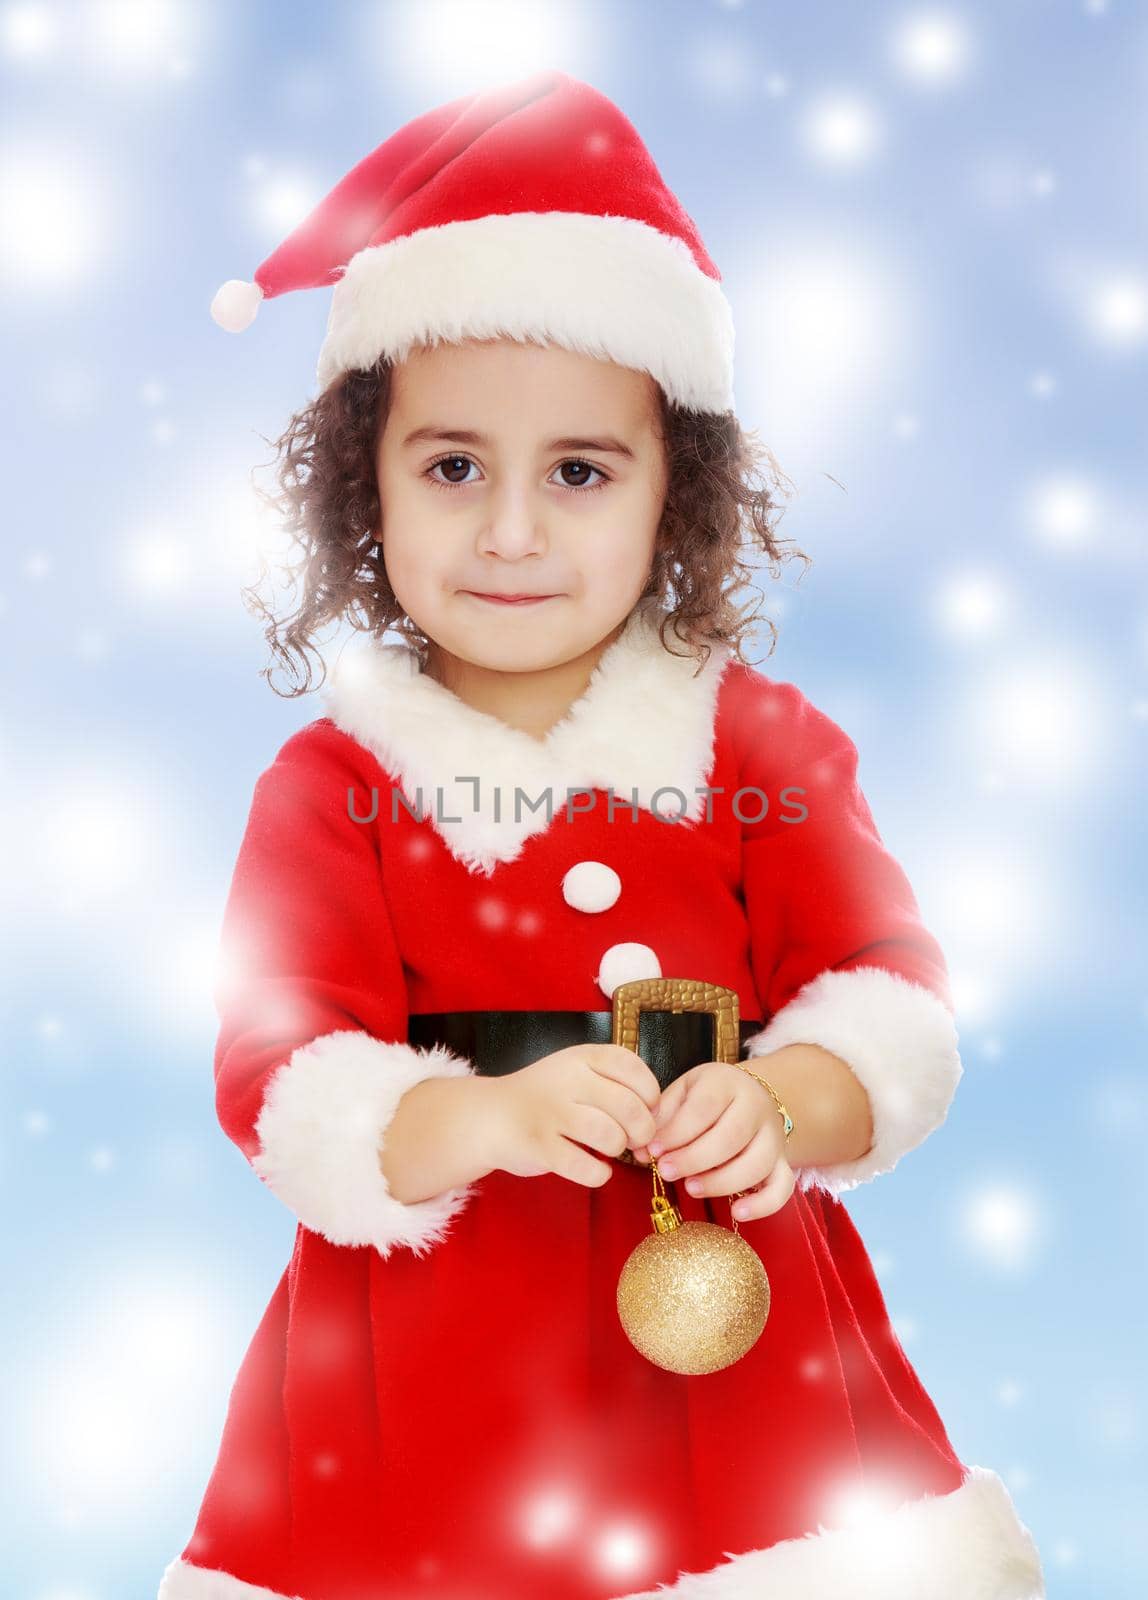 Very cute ,with curly hair little girl in a suit and cap of Santa Claus , is holding a Christmas toy. Close-up.Blue winter background with white snowflakes.